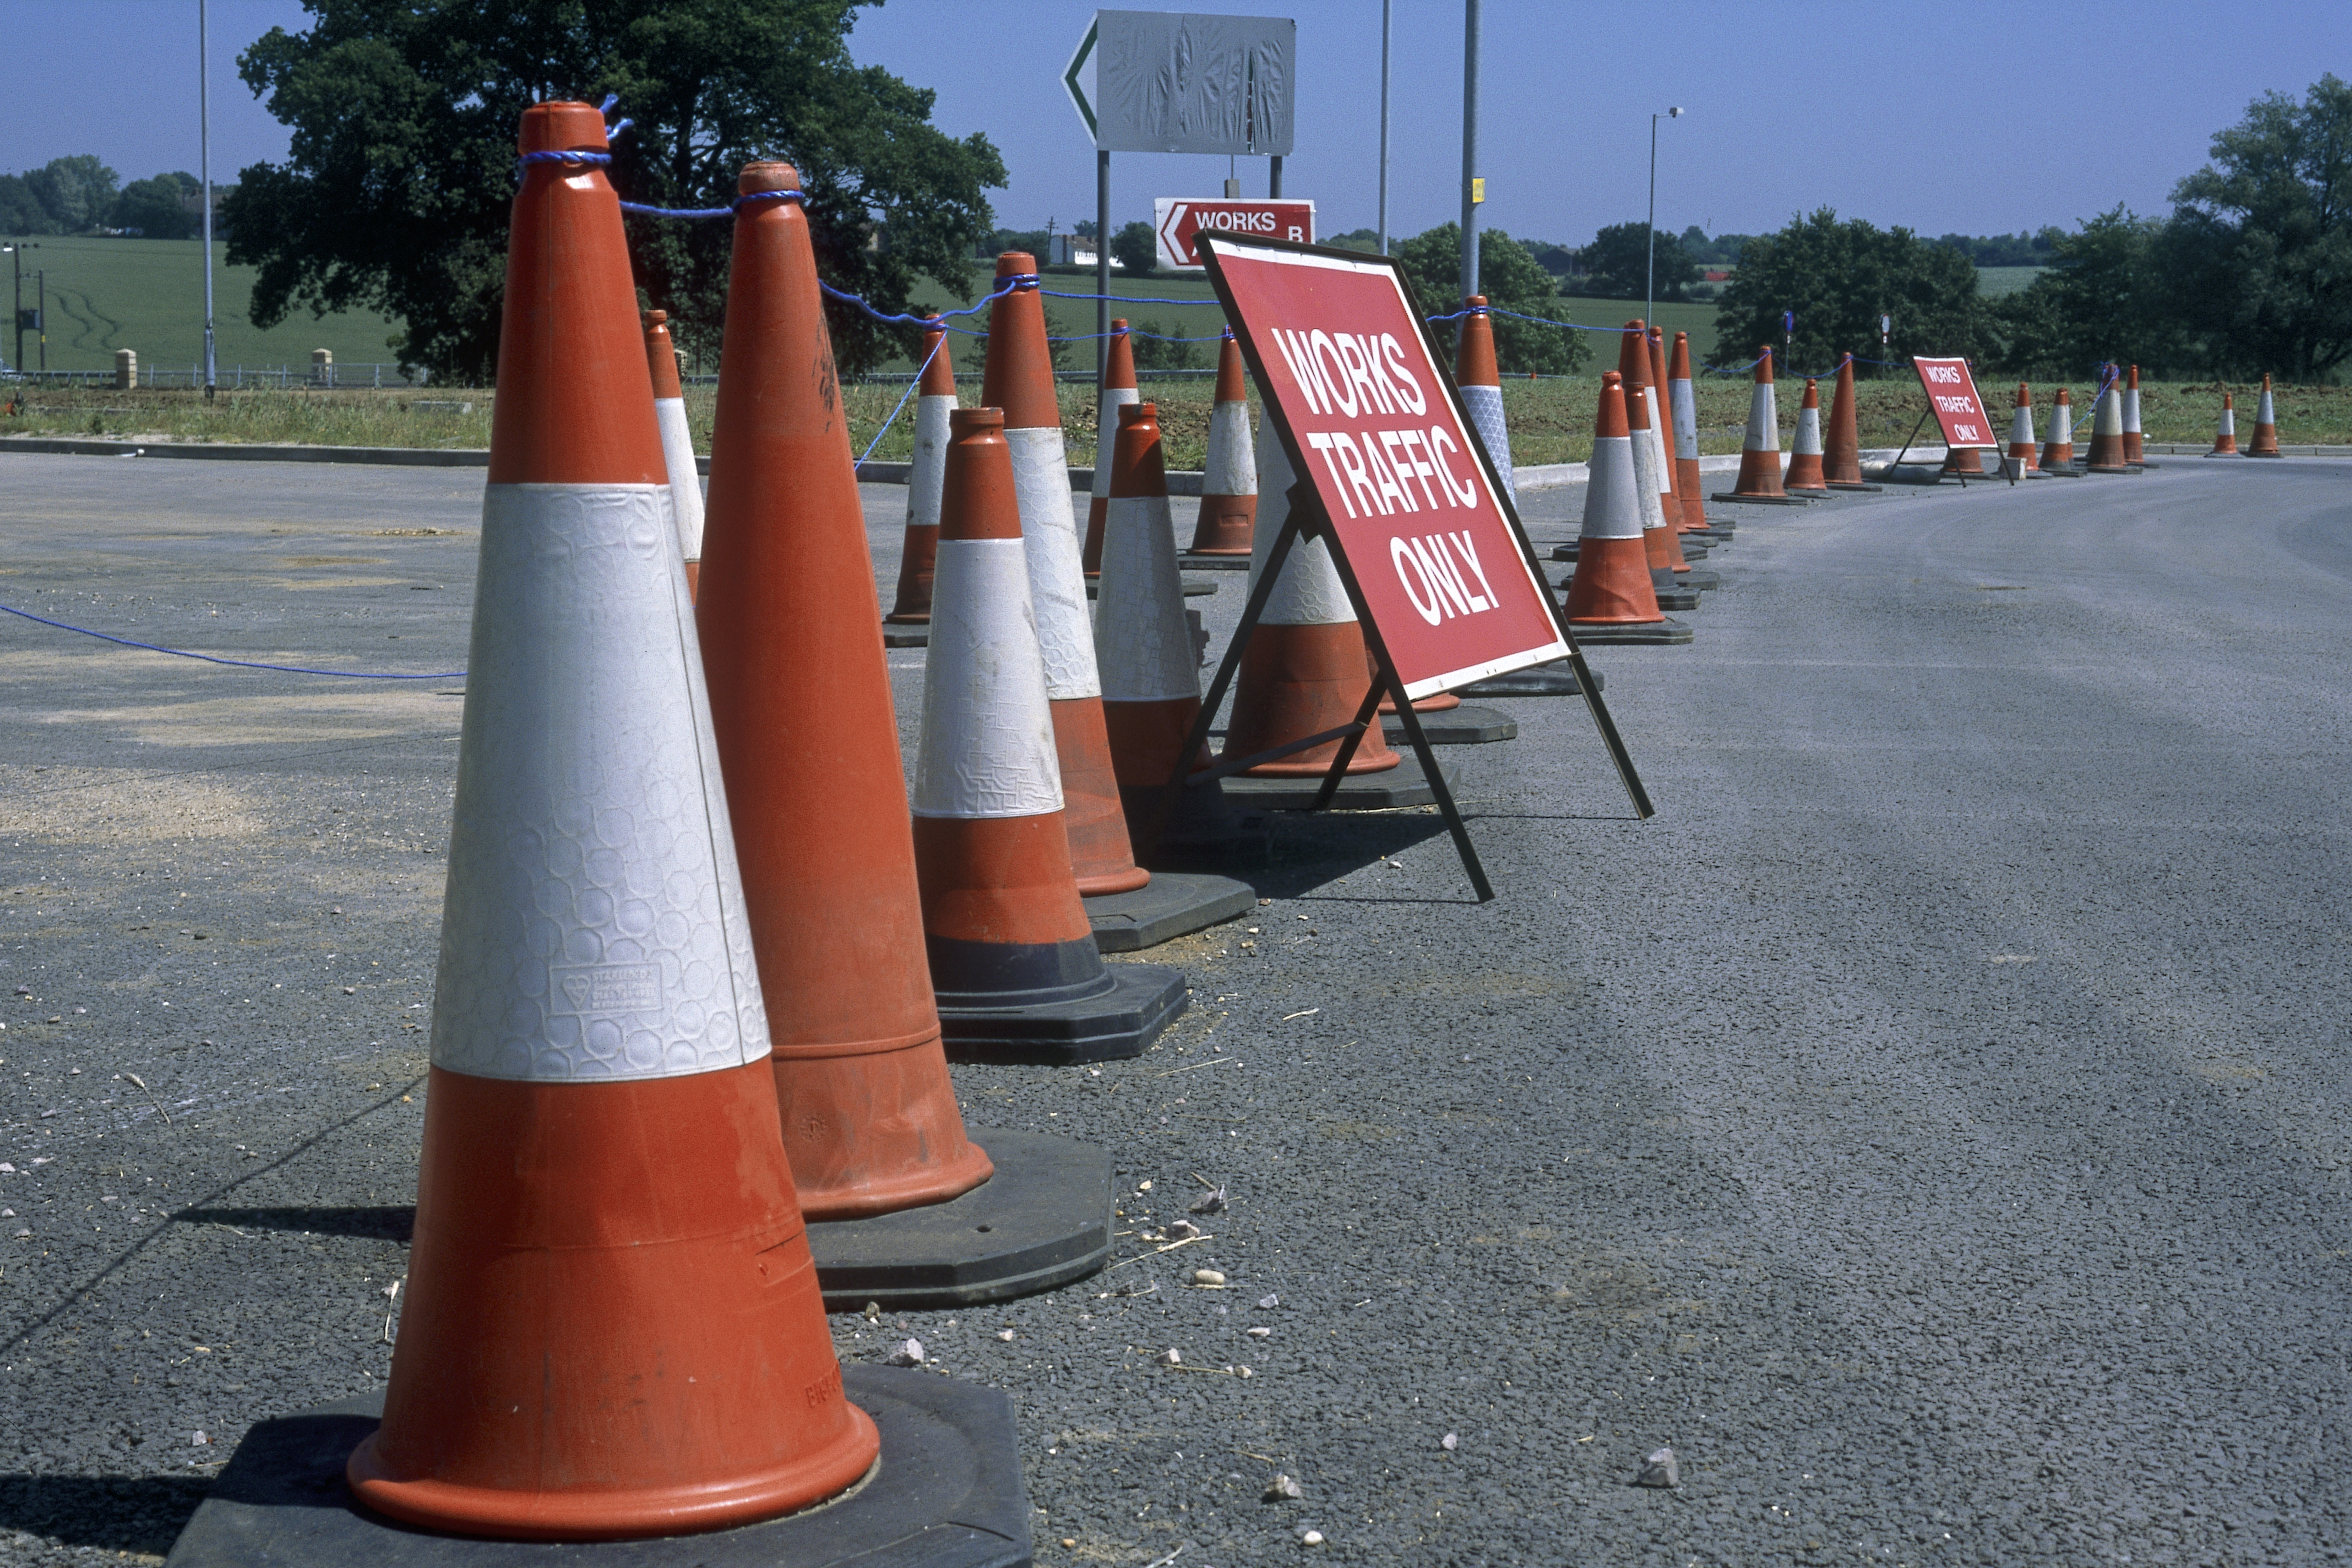 Traffic cones separating construction site and works access from public highway during construction of Great Leighs bypass. Essex, United Kingdom.